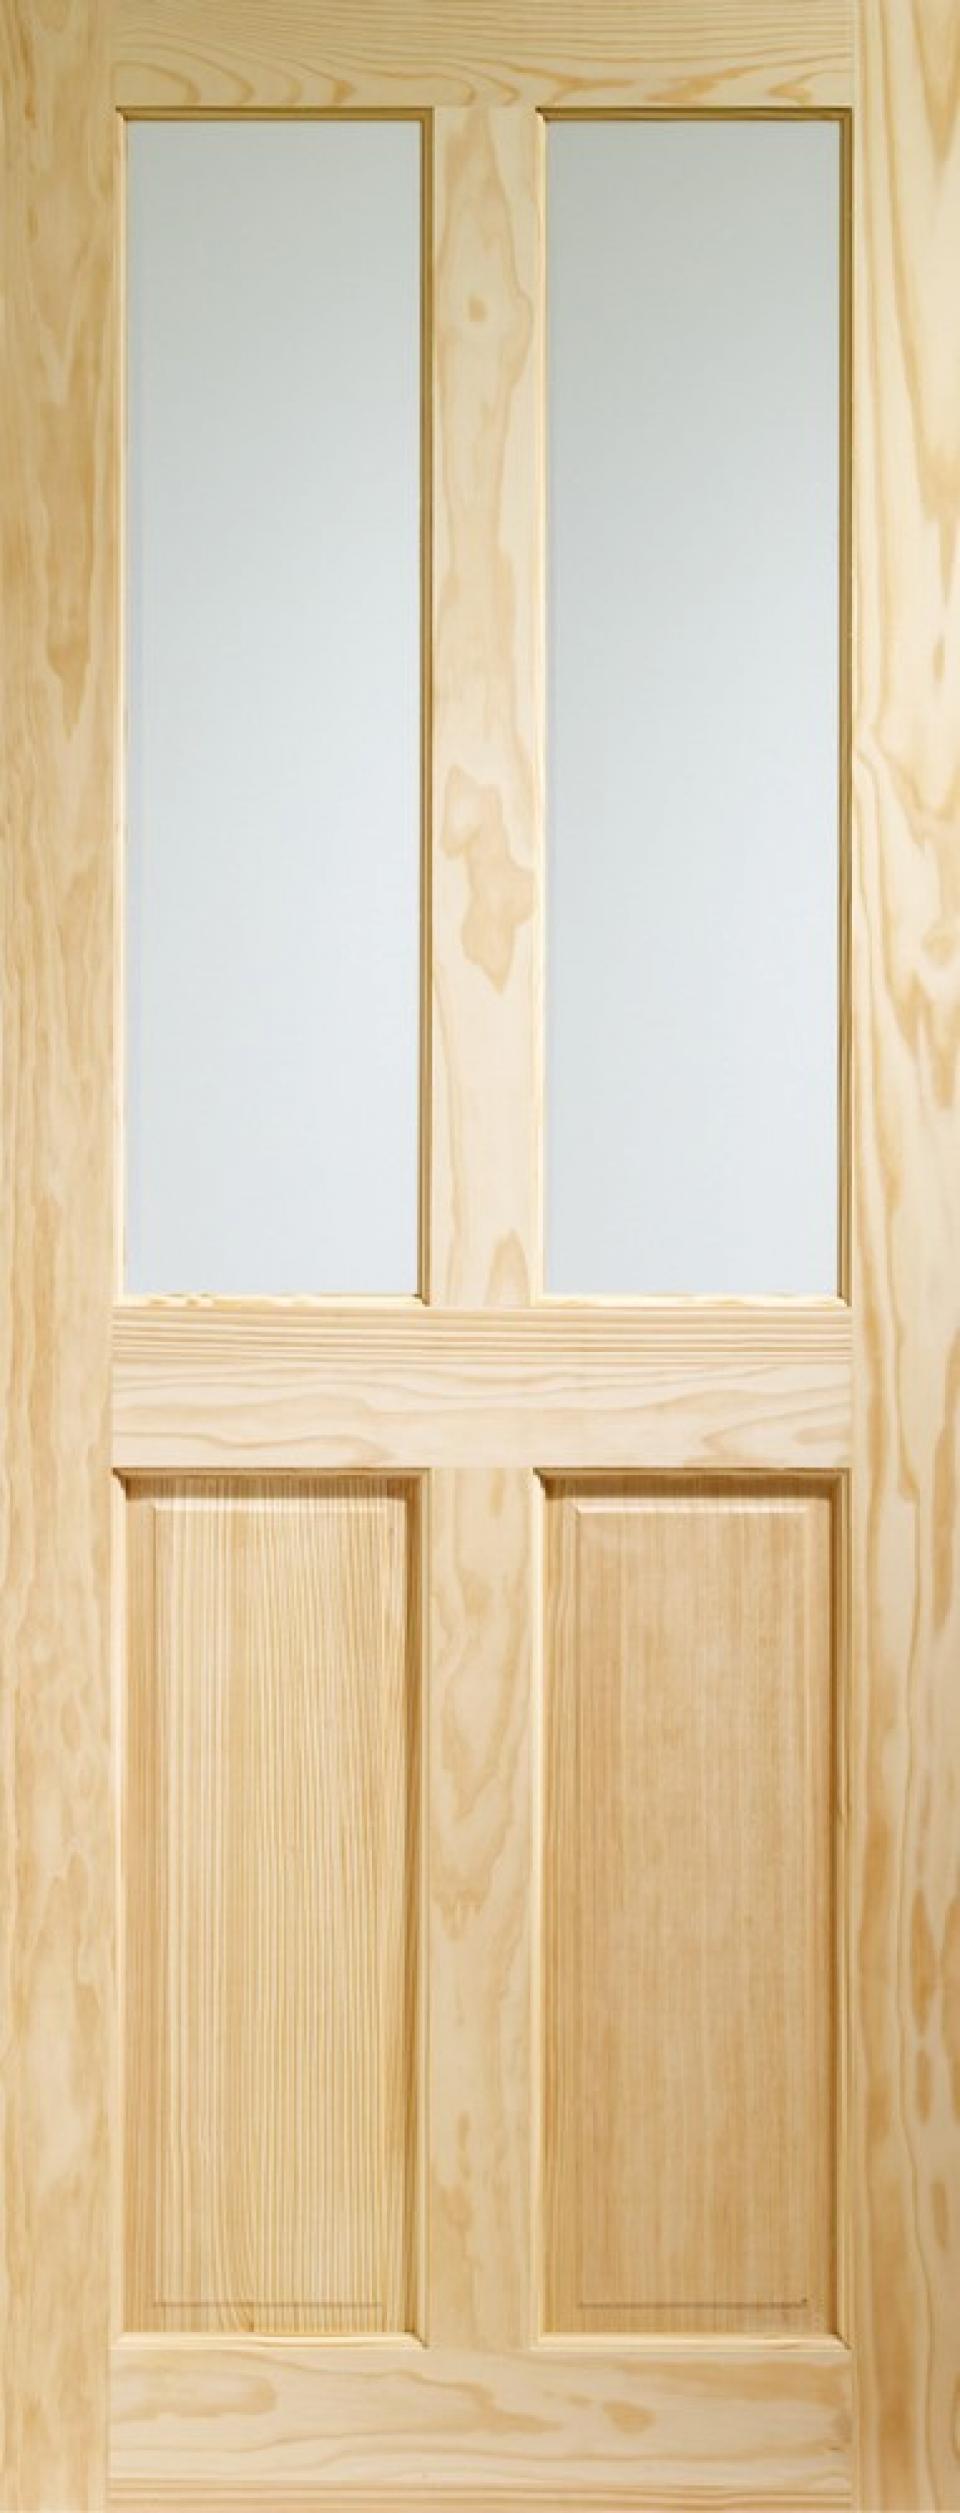 Clear Pine Vict Clear Glass 1981 x 762 x 35mm (30)